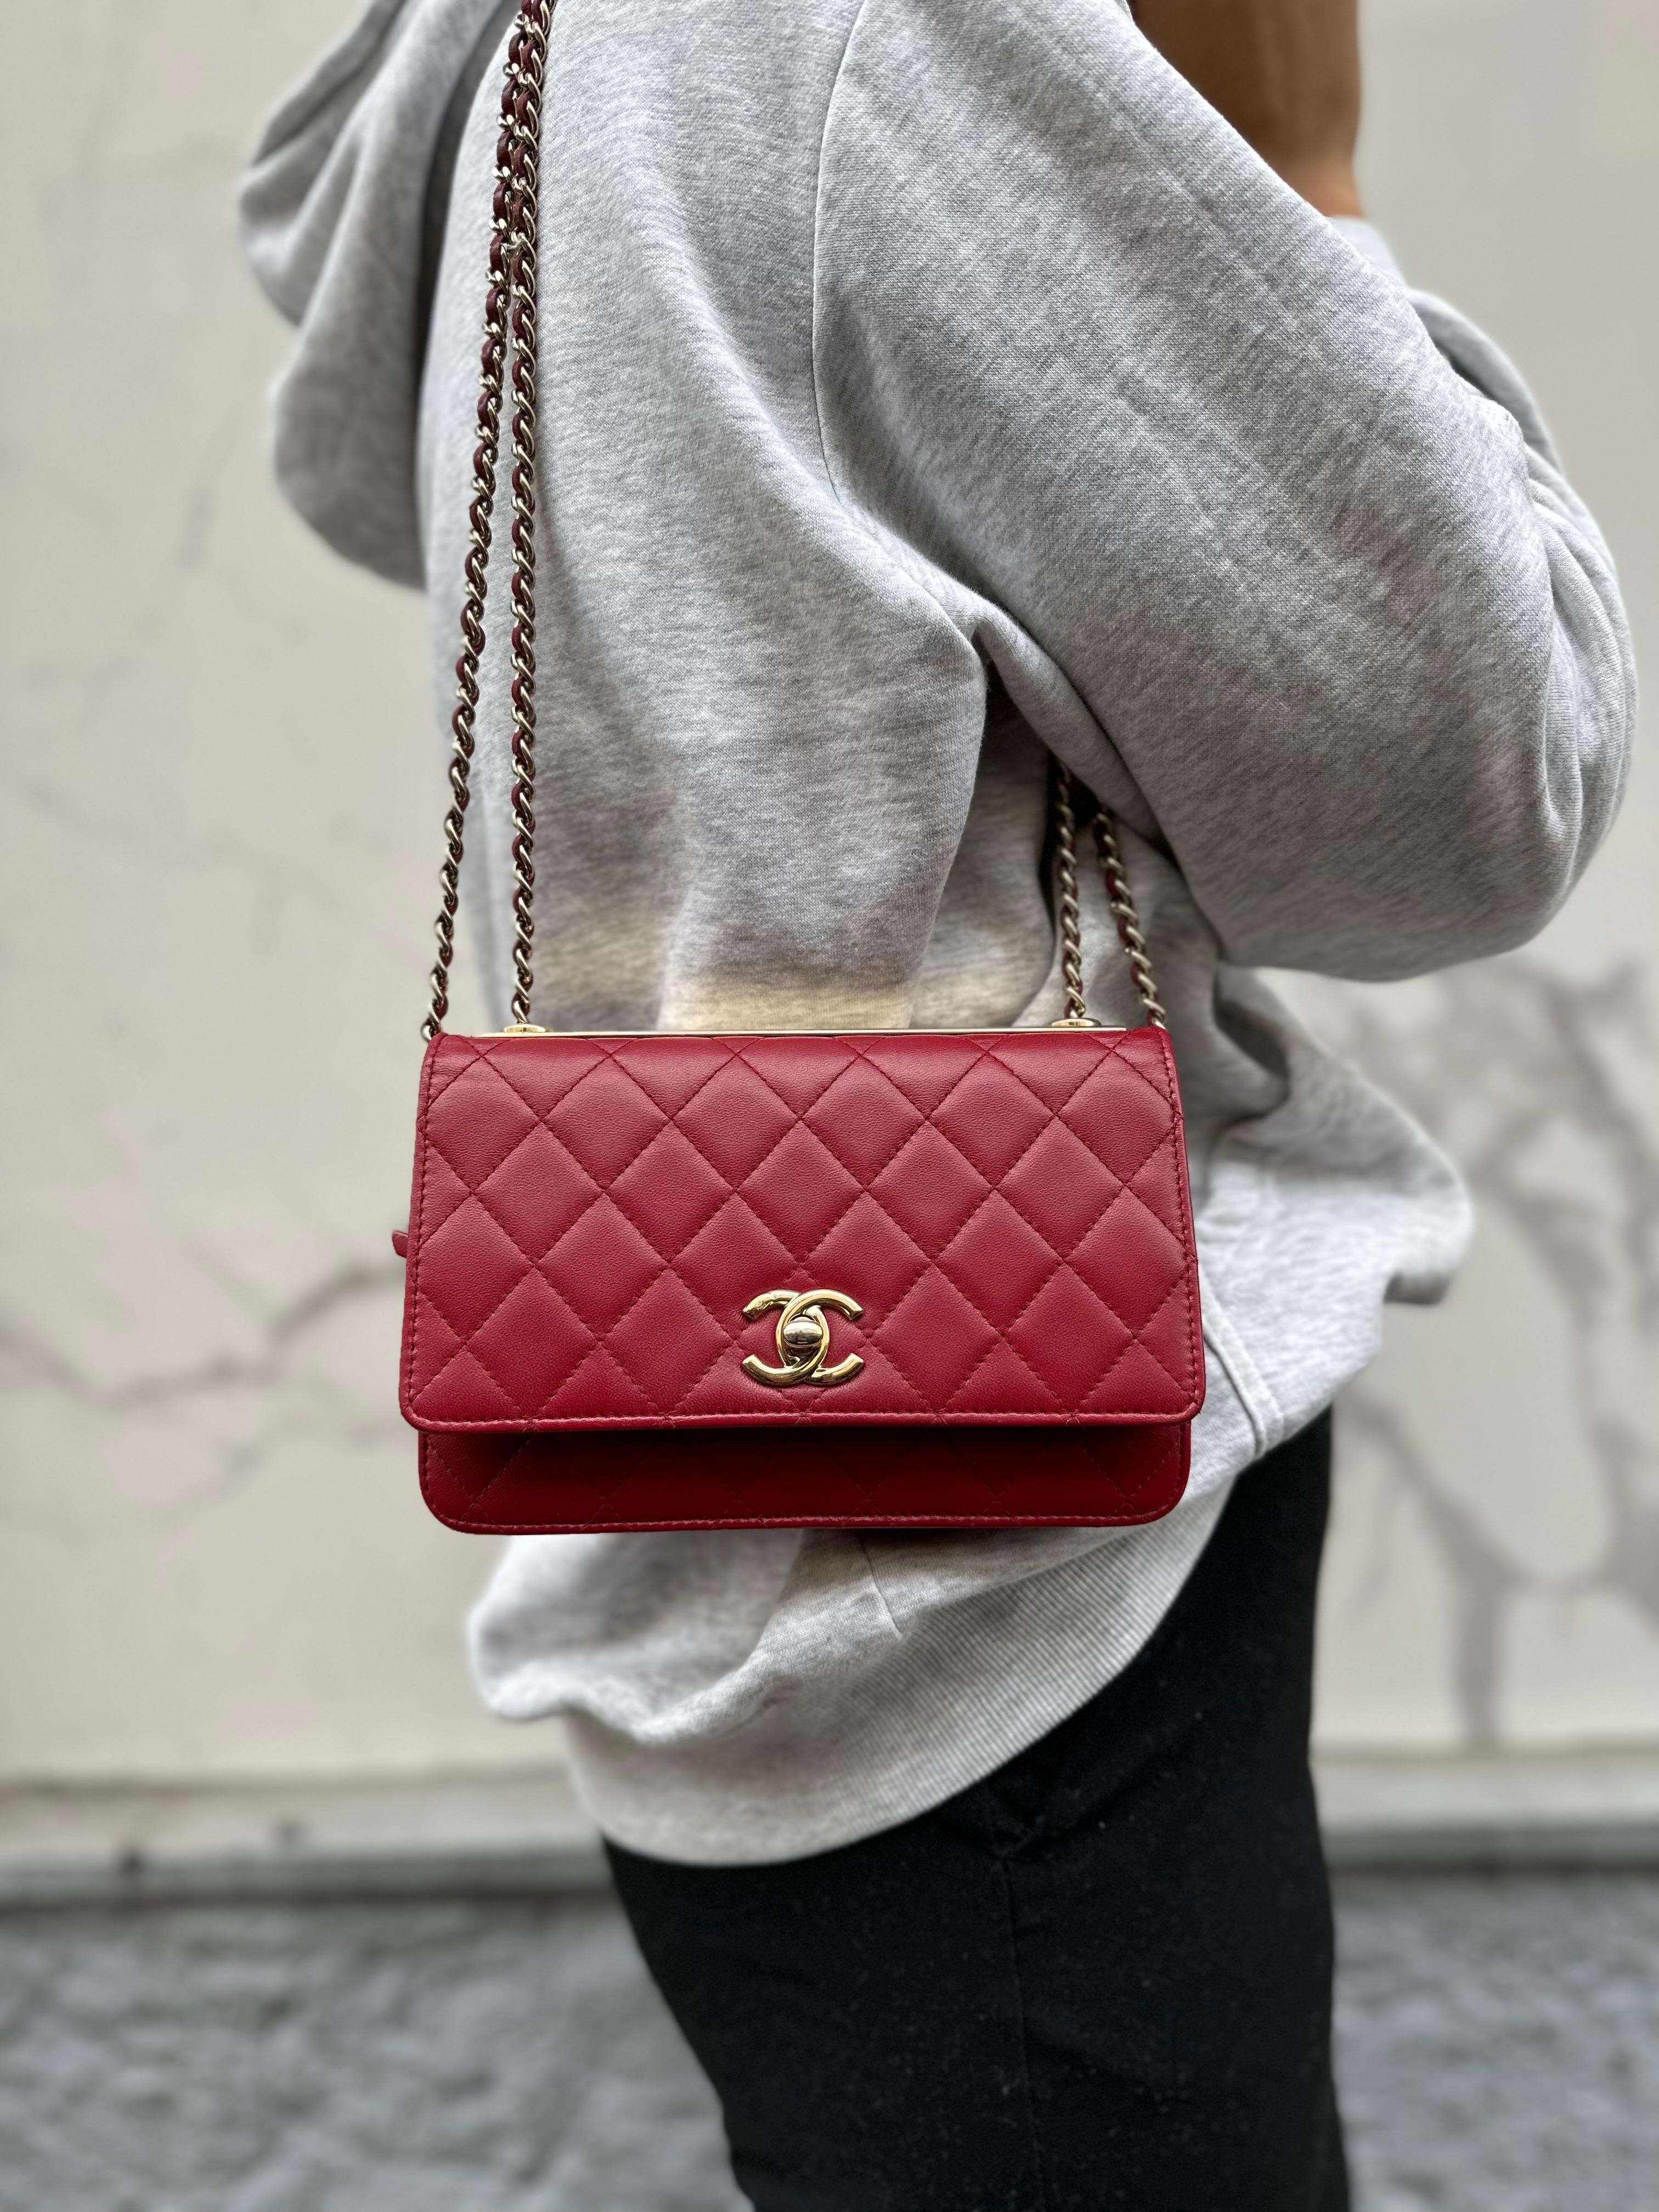 Borsa A Tracolla Chanel Wallet On Chain Rossa 2016/2017 12